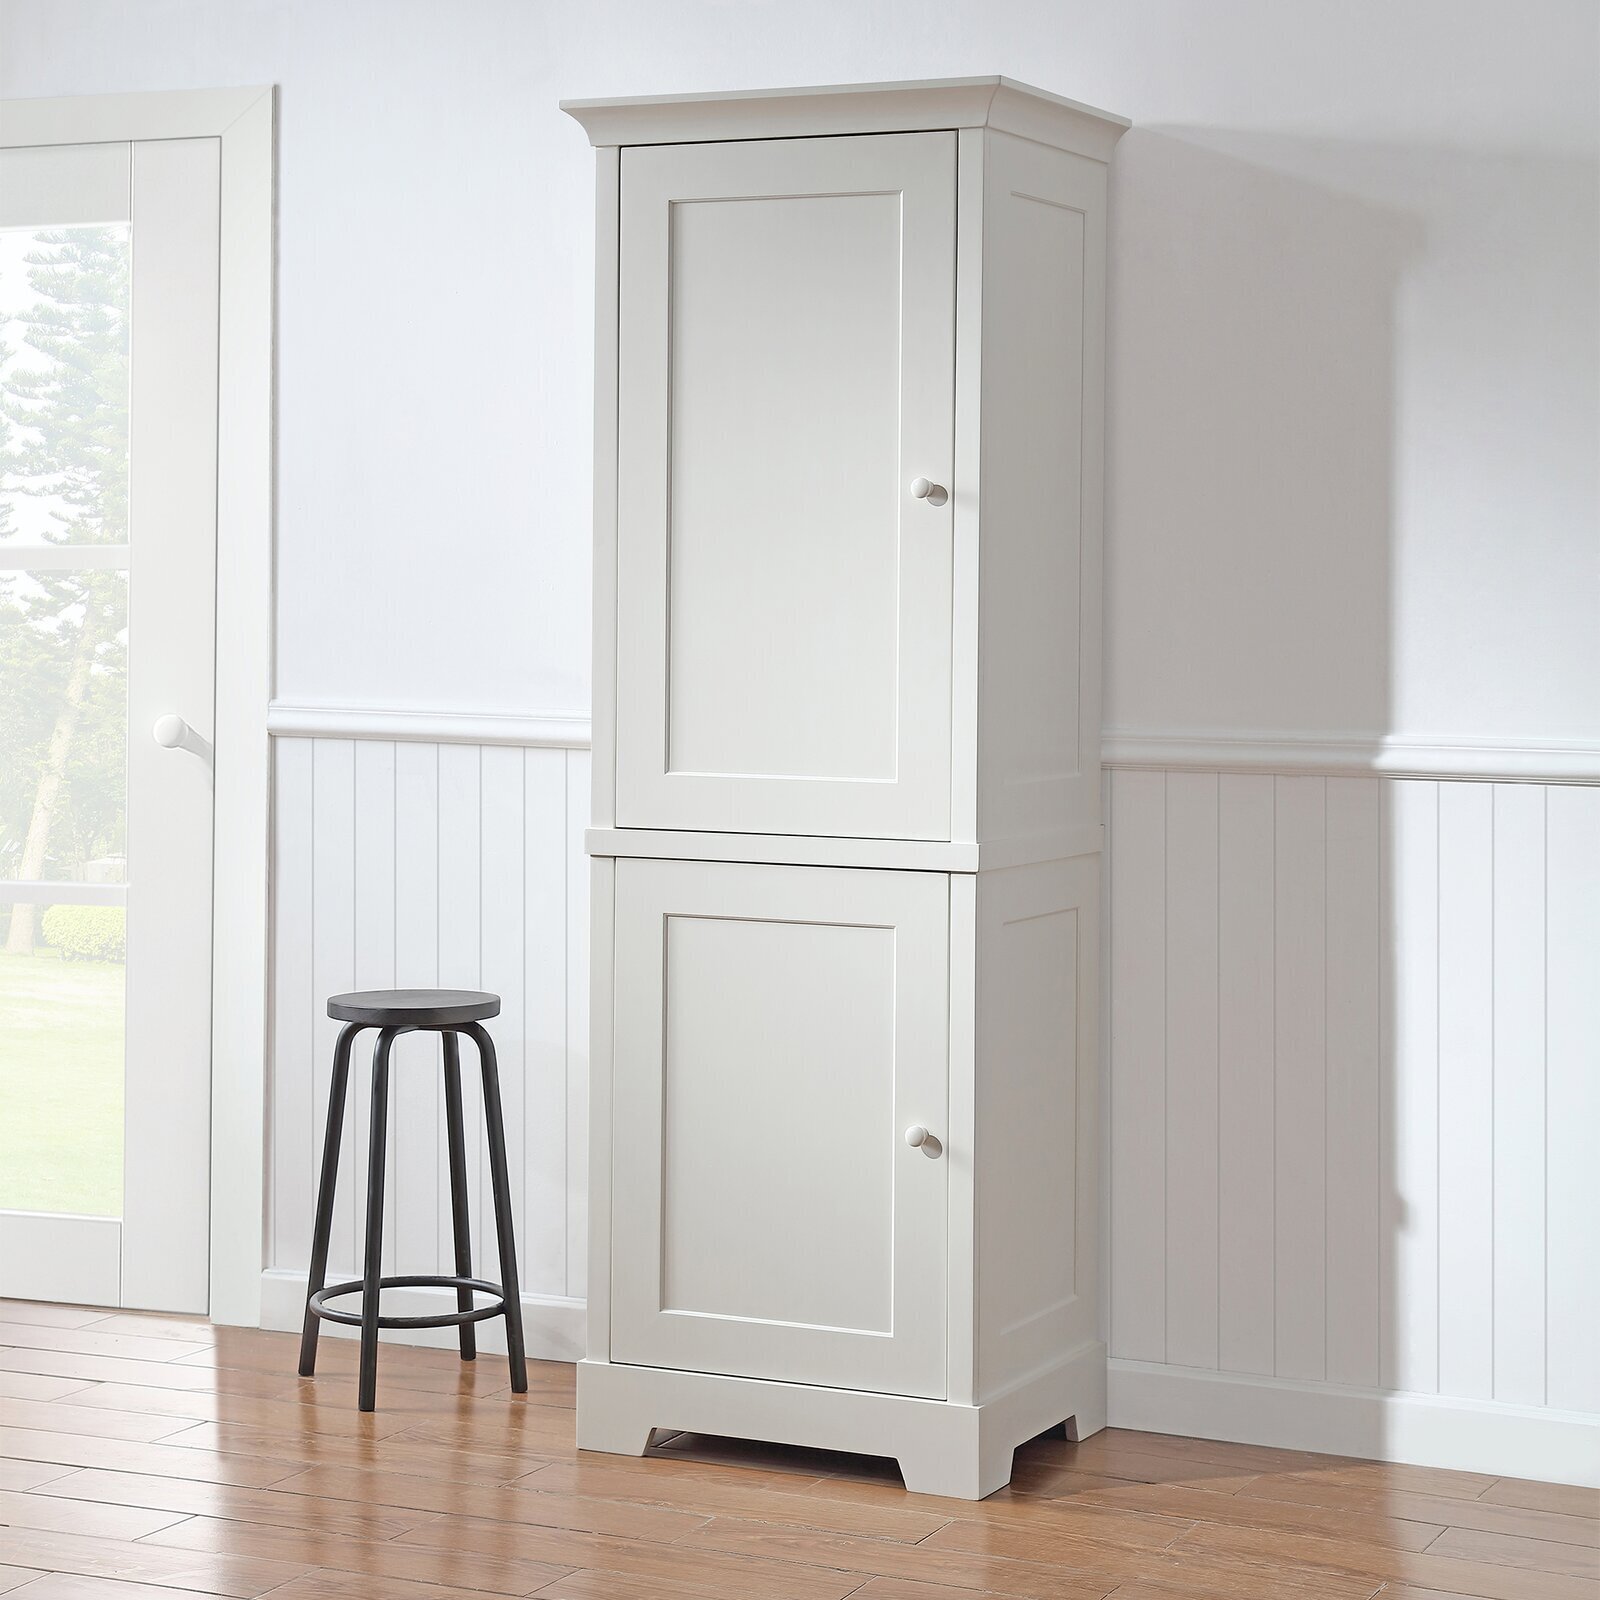 How To Install Pantry Cabinet Side Finish Panel